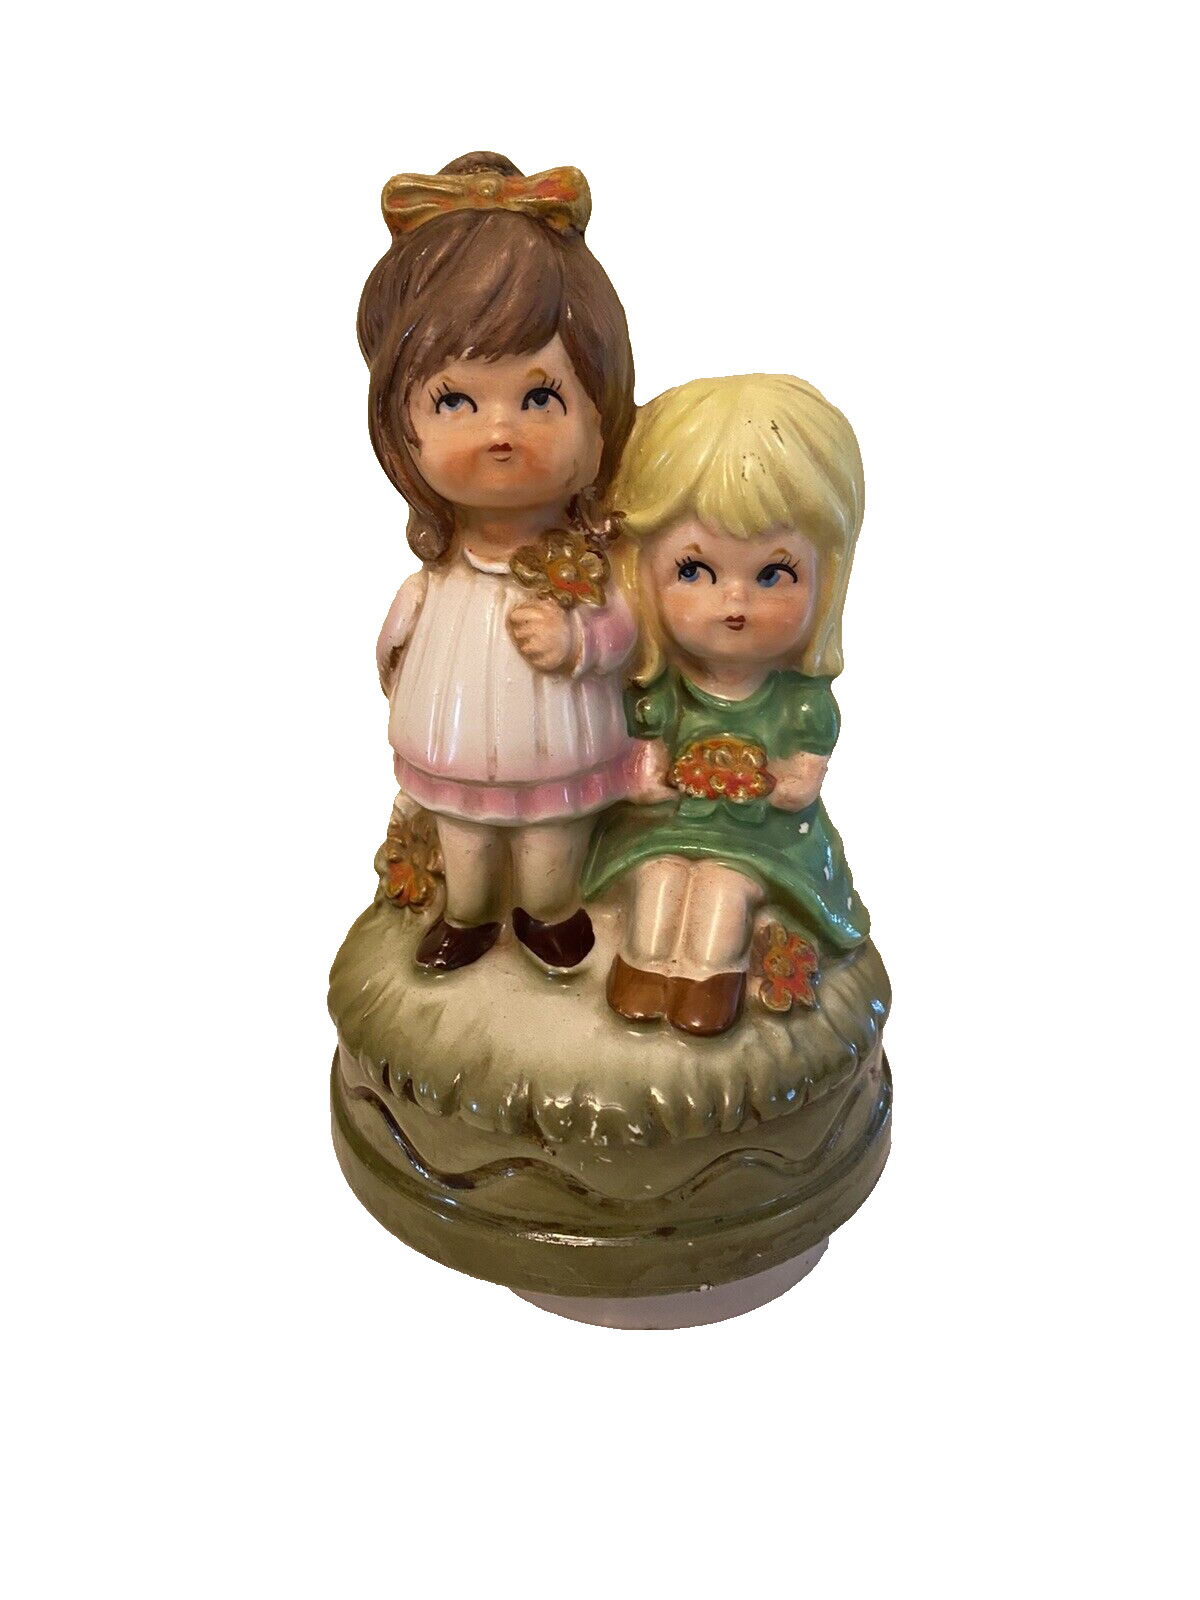 The Akron Vintage made in Japan porcelain music box two girls